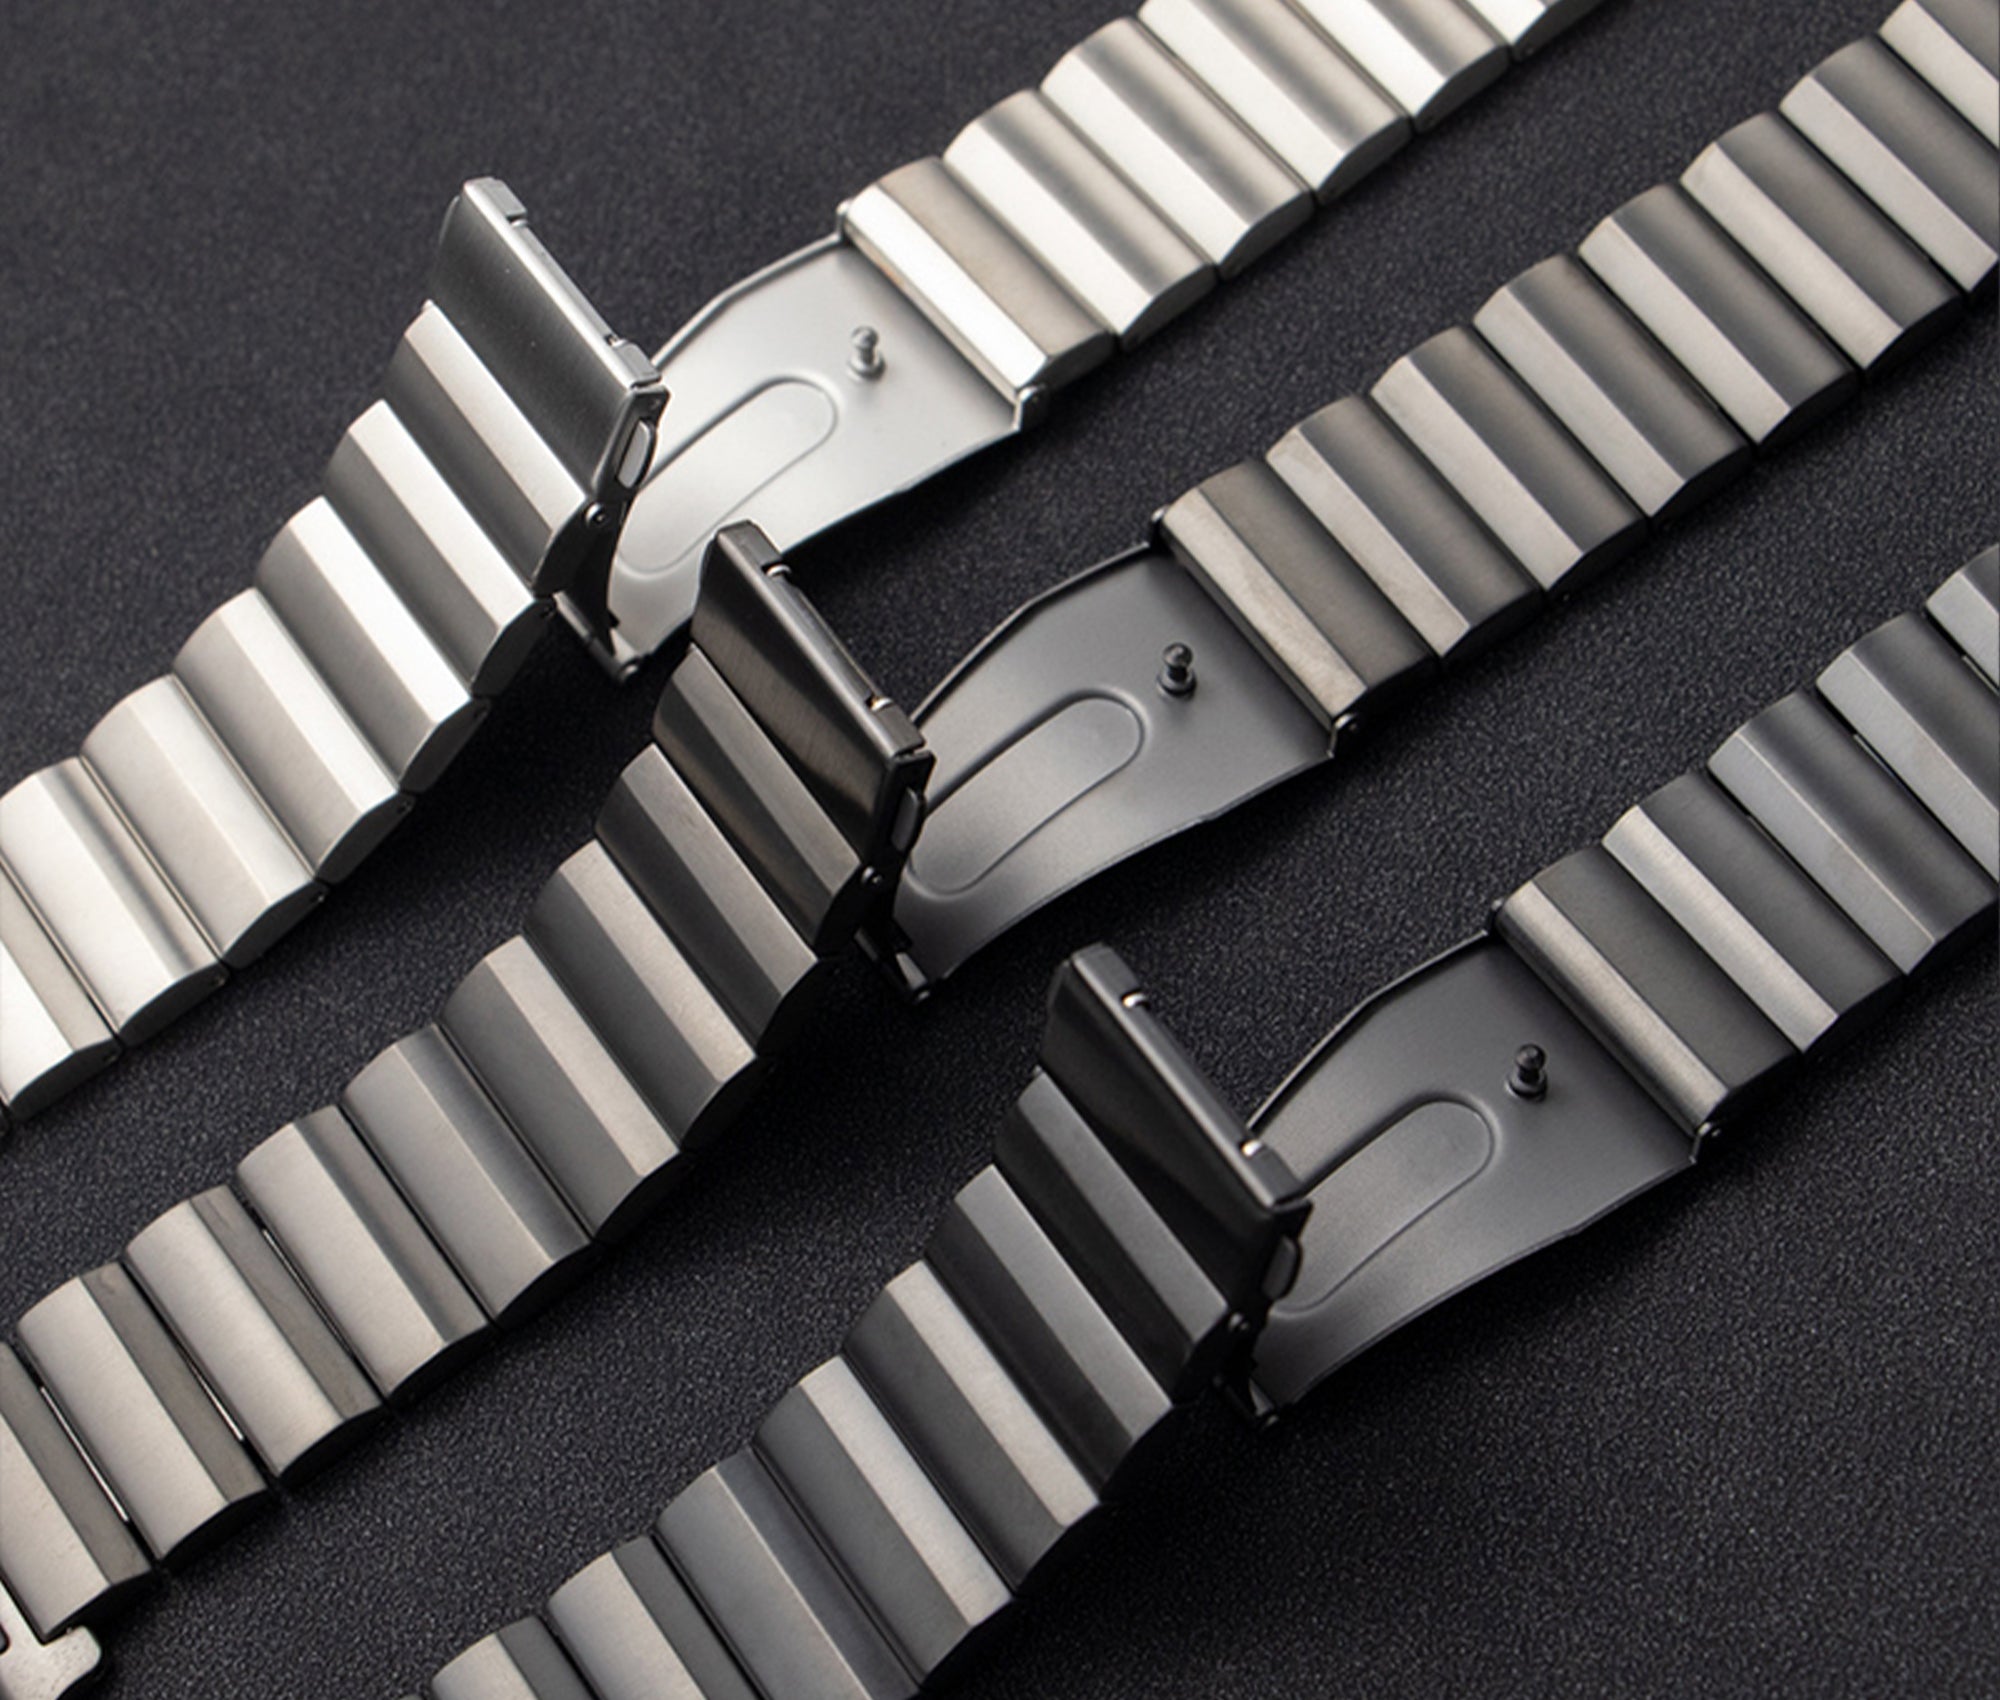 Komodoty Titanium Apple Watch Band Buckle View featuring Black, Gray and Silver